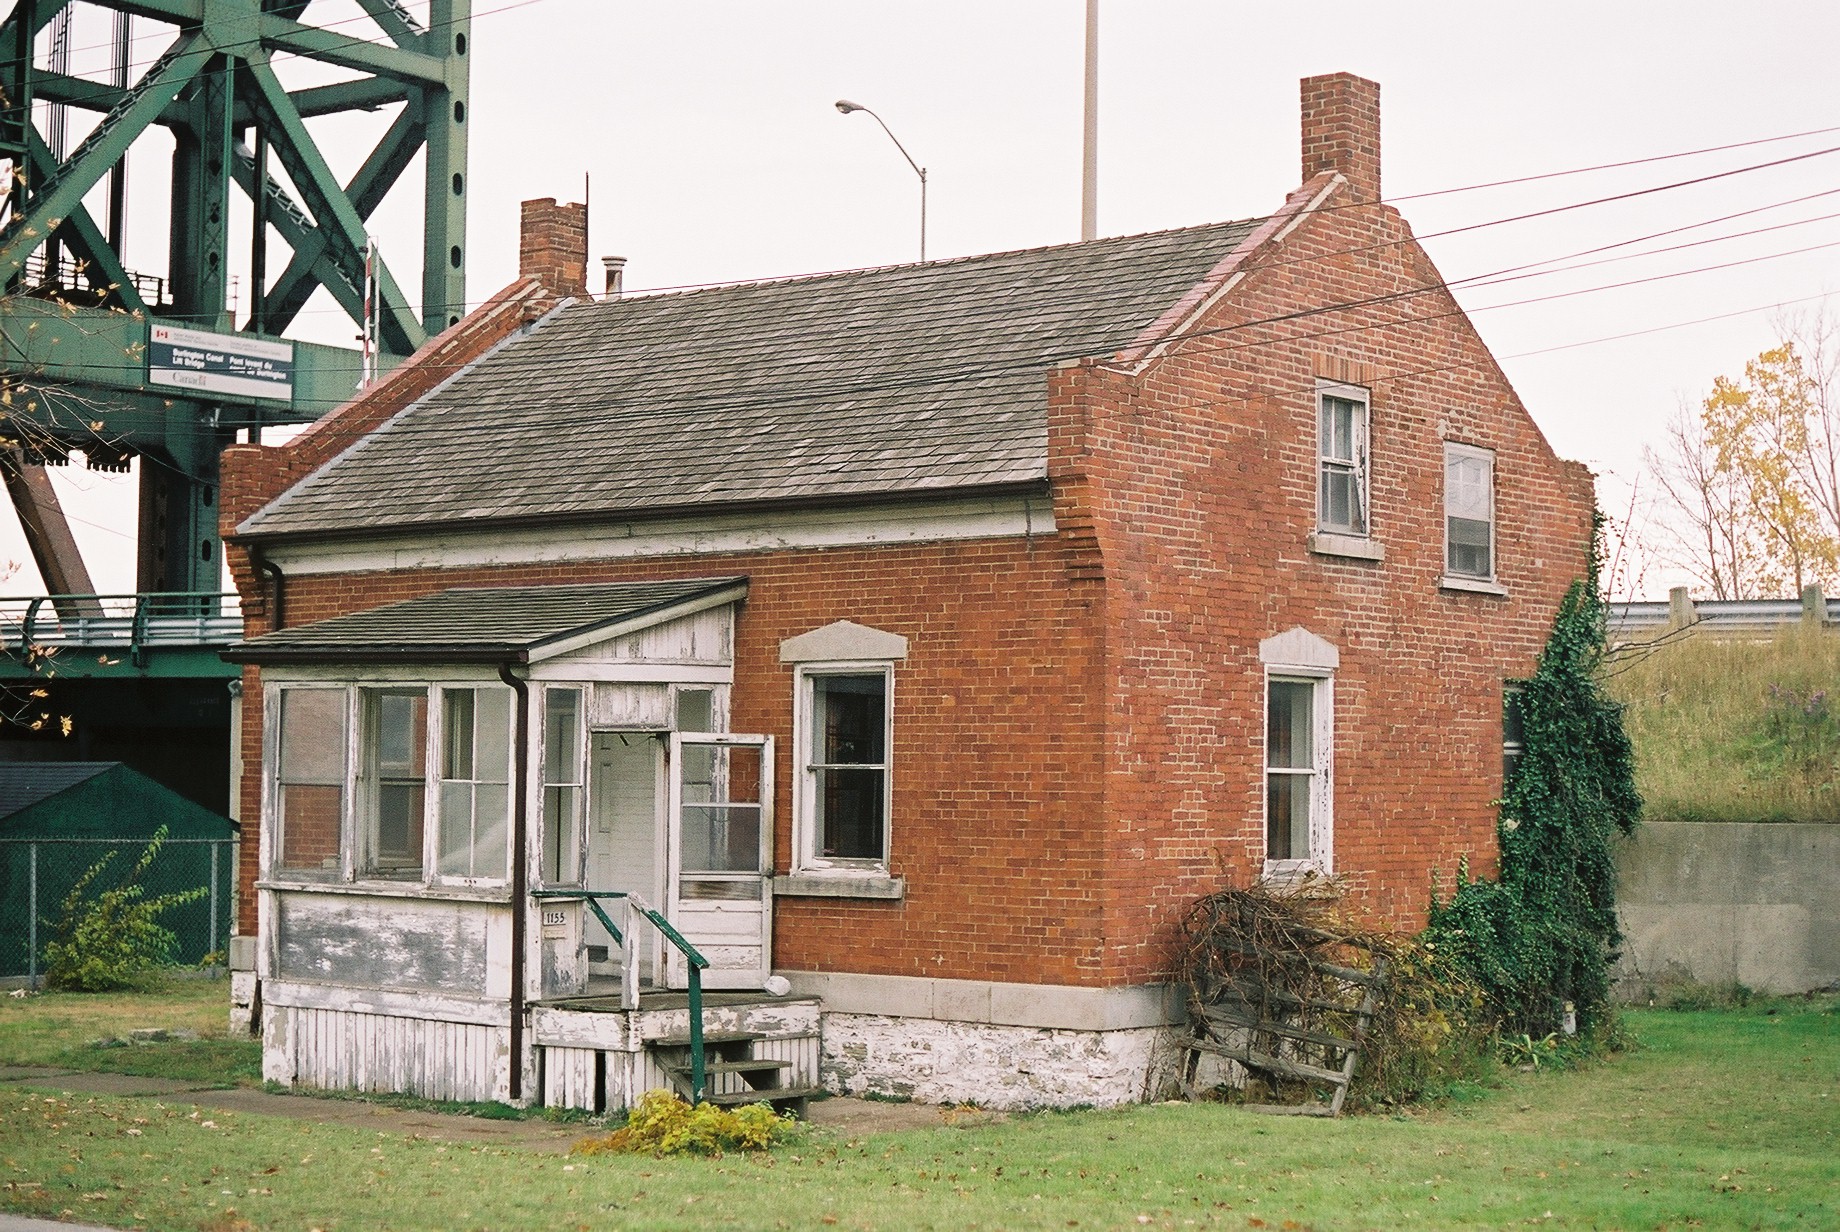 Lightkeeper's Cottage in 2004